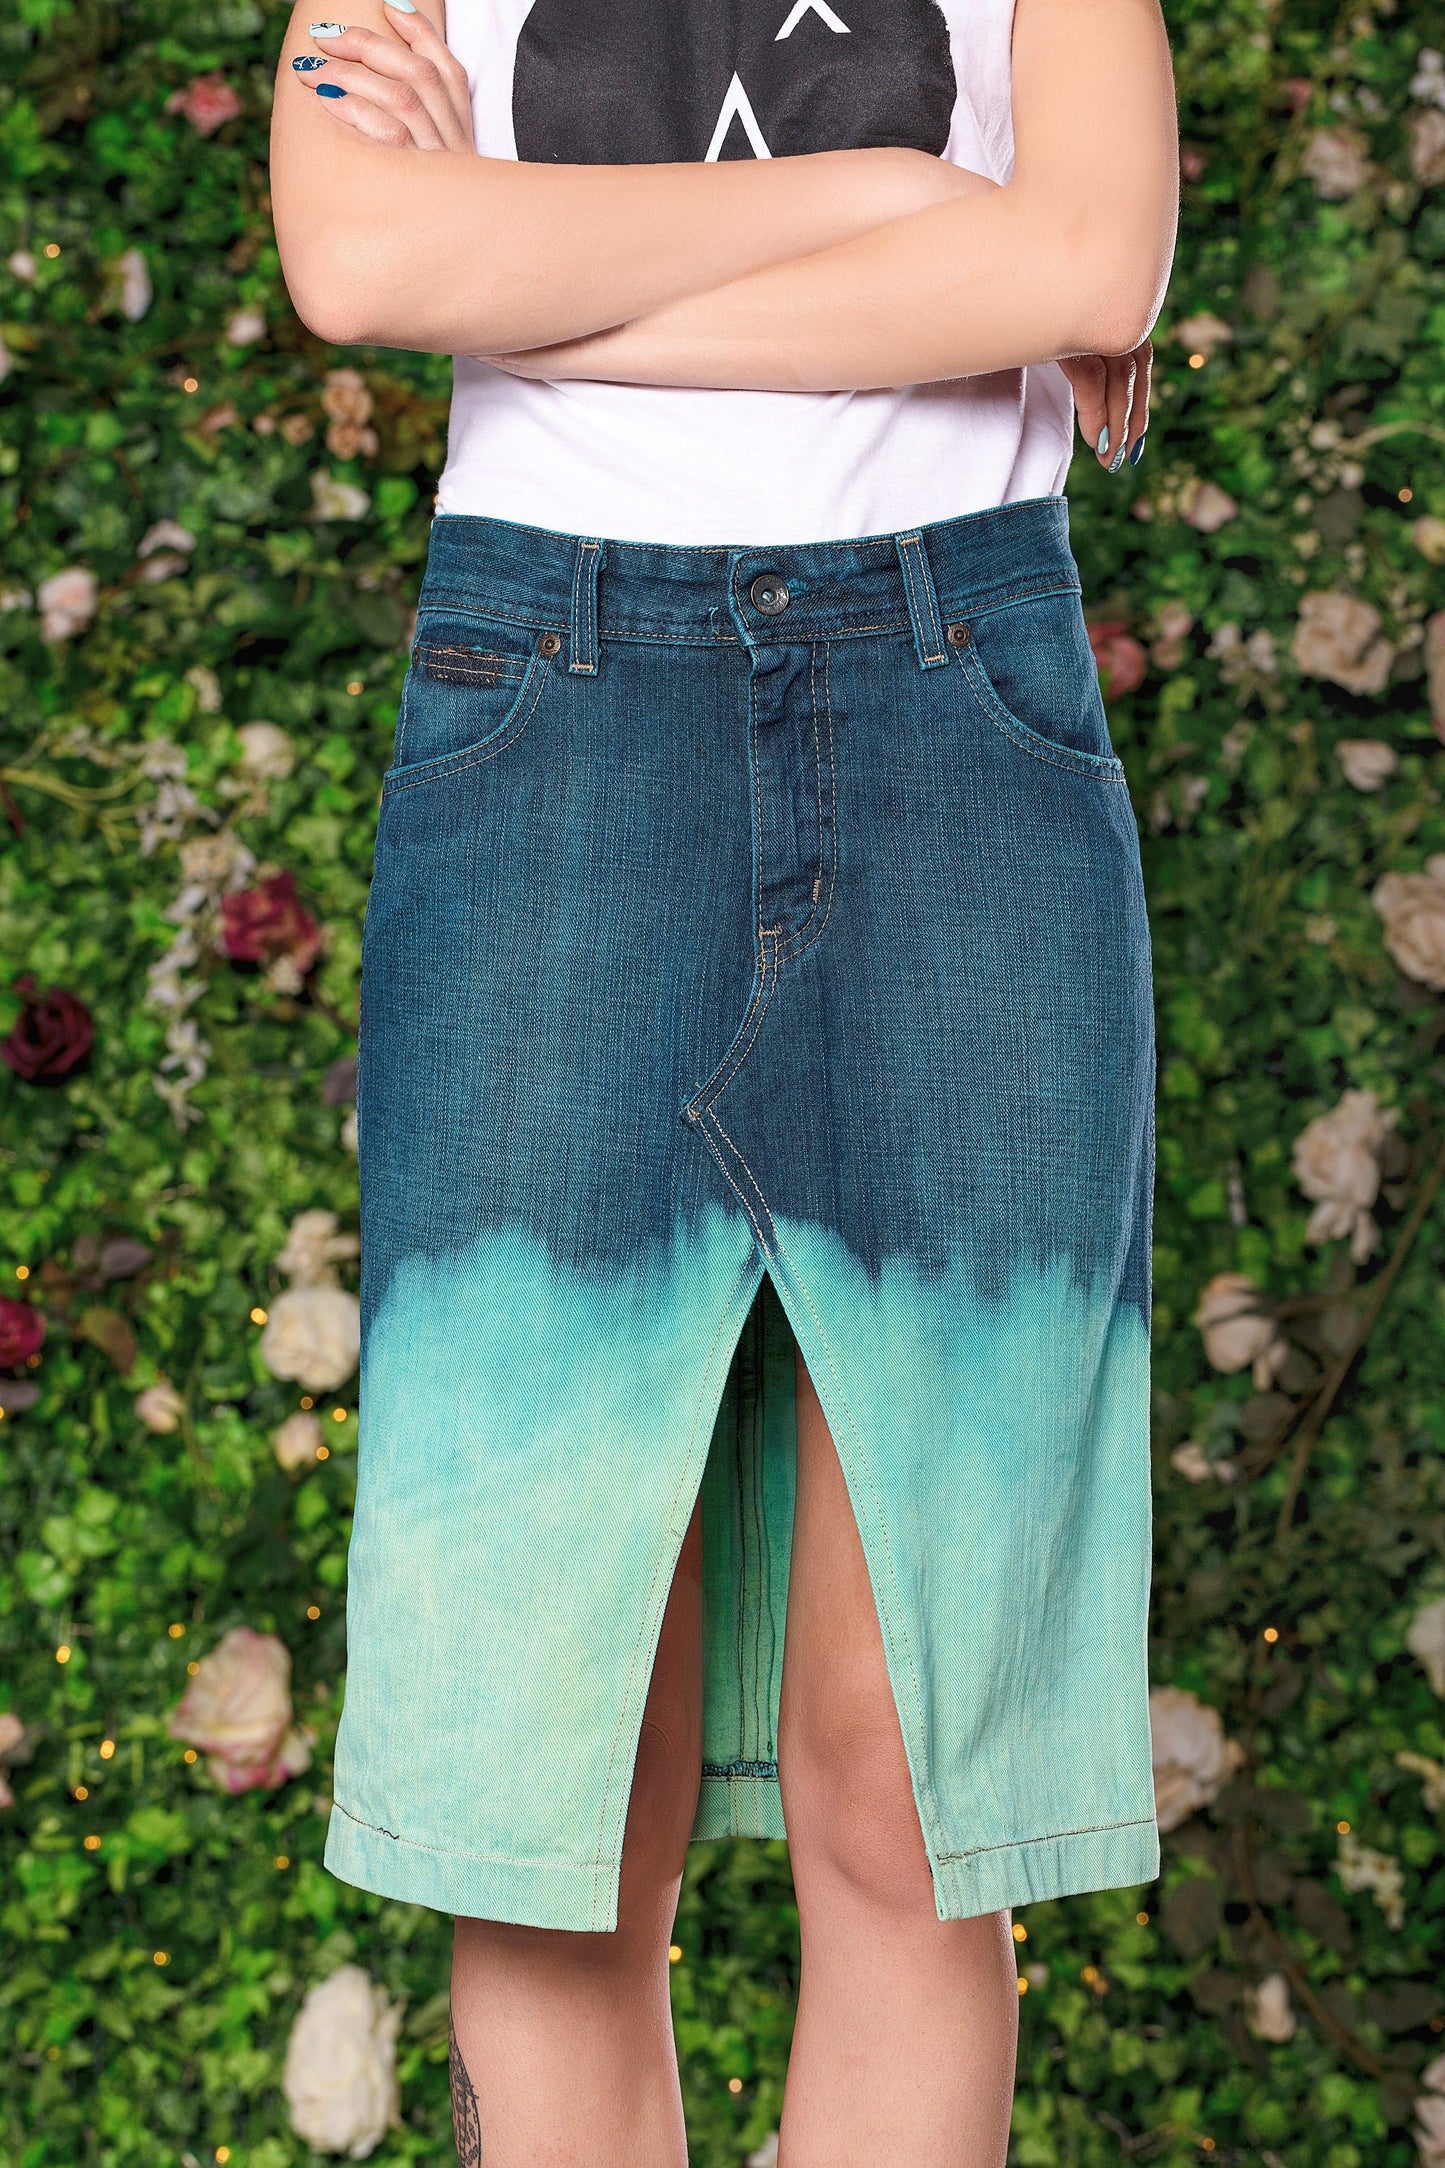 Turquoise dip dye gradient denim skirt with pockets | size S